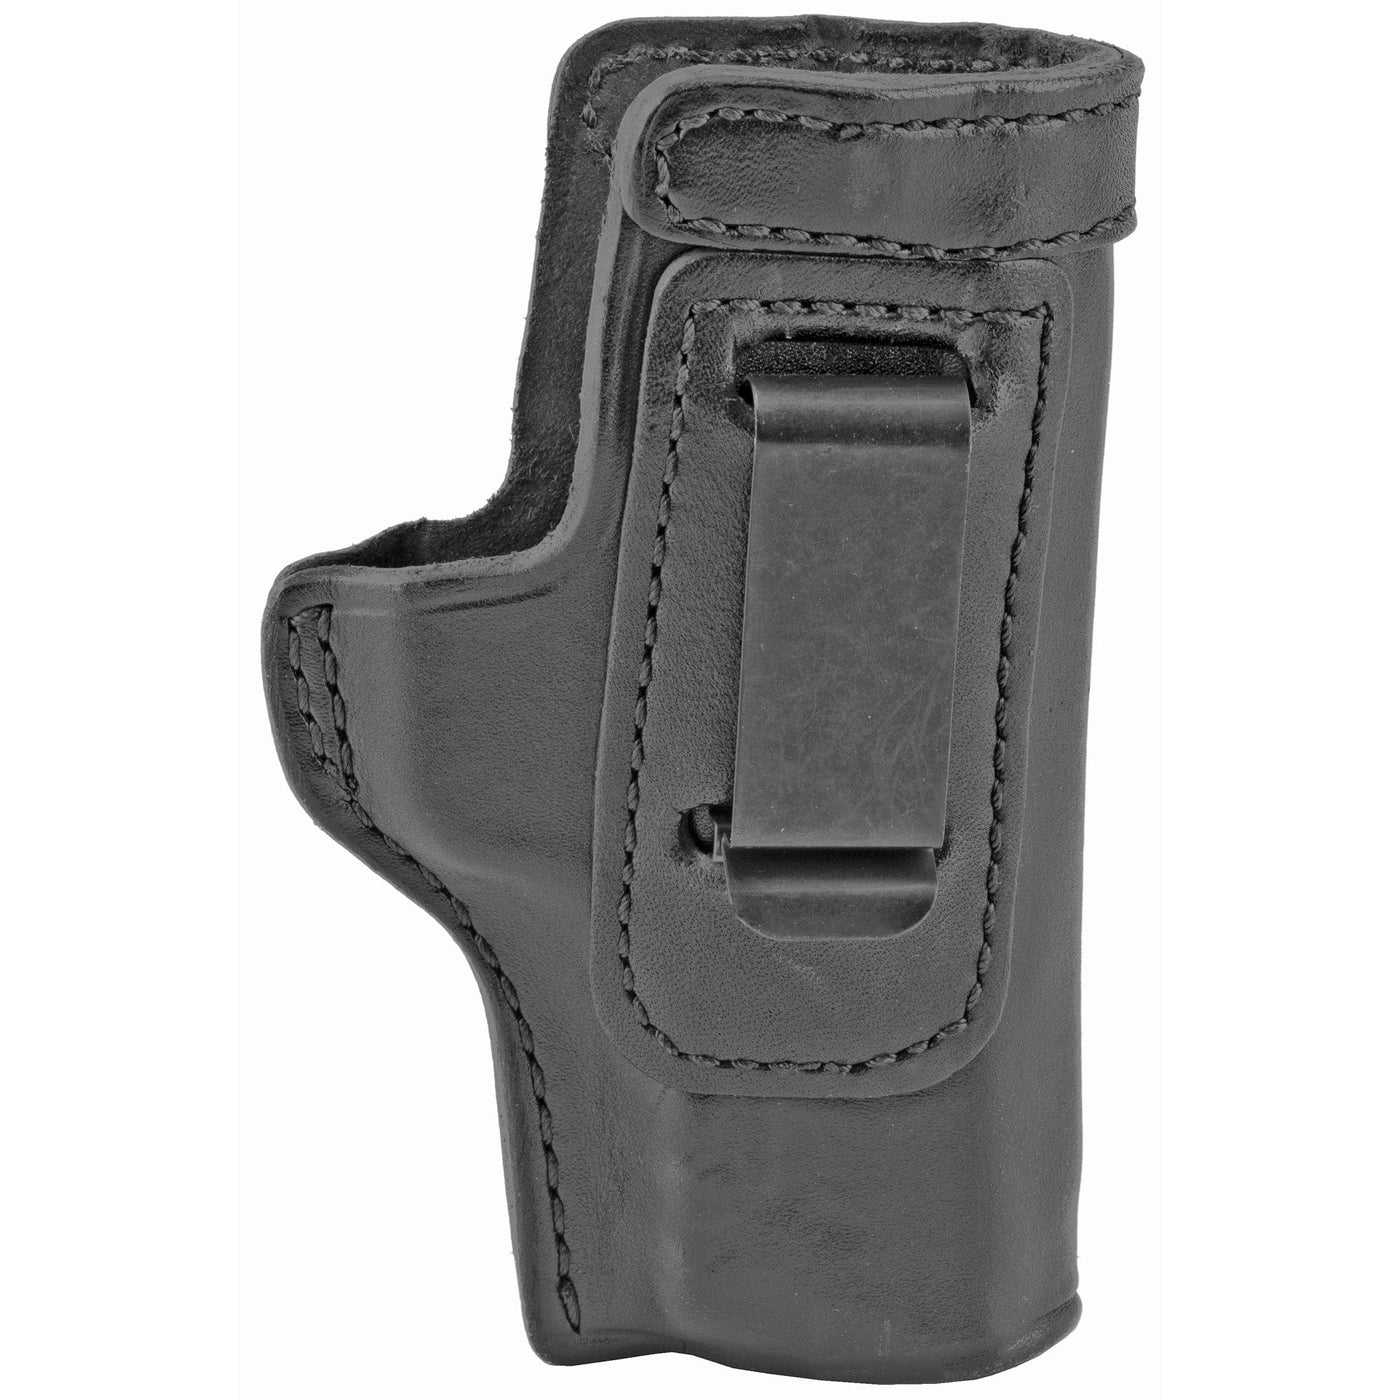 Don Hume D Hume H715-m Sw Mp 9 Shld Ez Rh Holsters